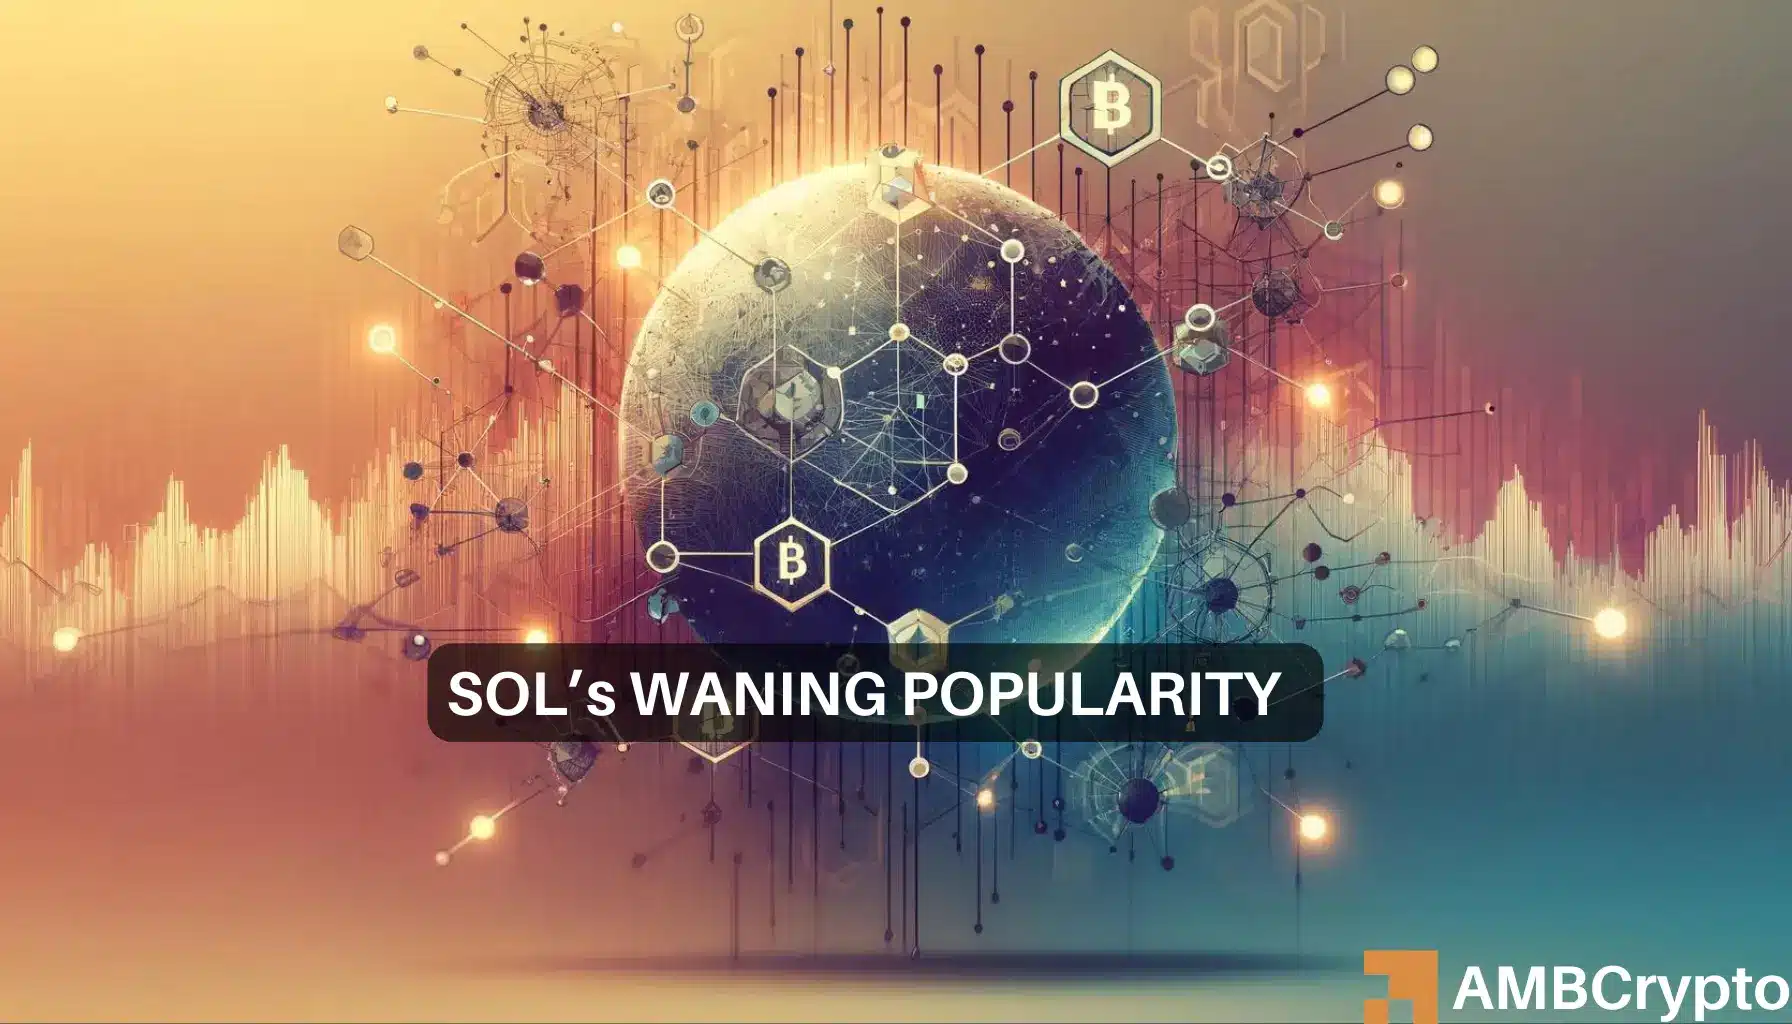 Is THIS threatening the Solana ecosystem? Yes, but here's why SOL is safe